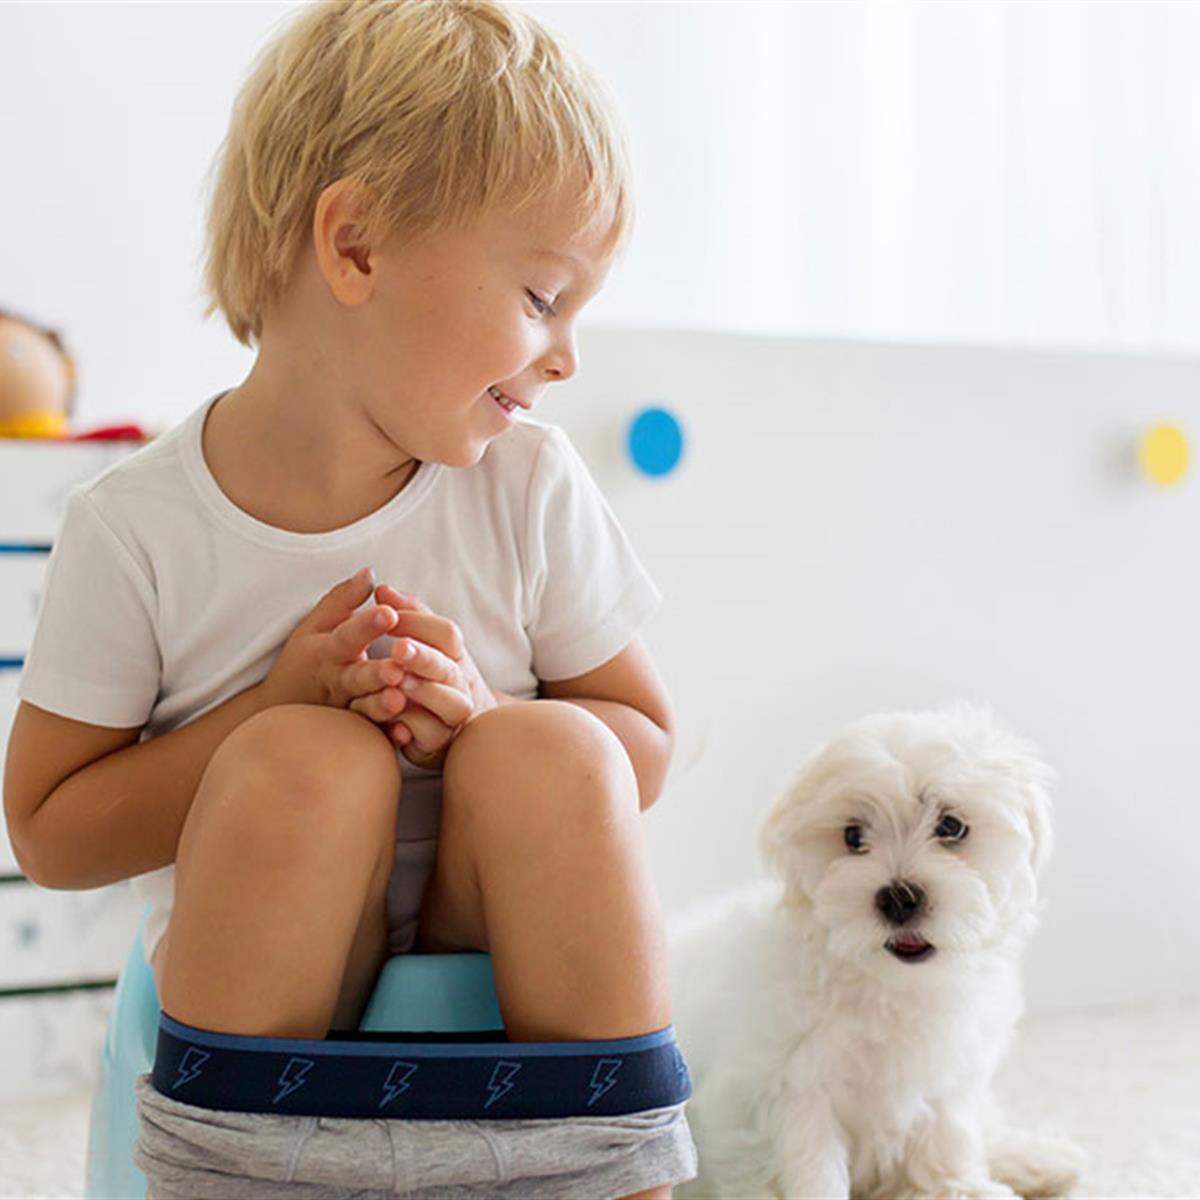 Potty training tips for when your child wets their pants